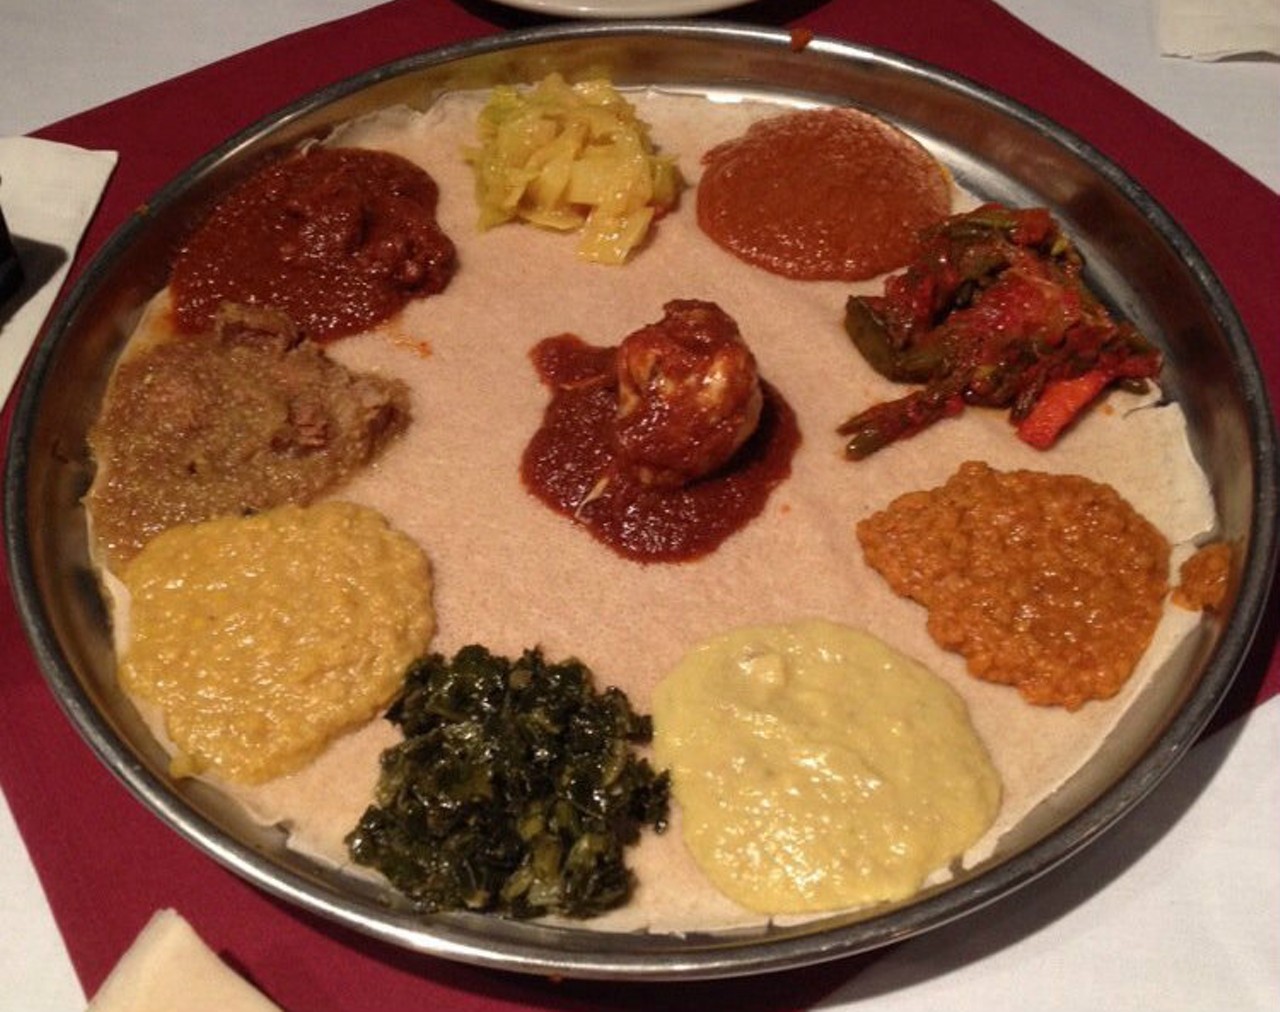 Meskerem
3210 S Grand
Have you ever had Ethiopian food? Located on South Grand, Meskerem is a great place to try the east African cuisine. Order a platter, tear off some injera, and start filling up -- eating with your fingers is A-OK here. Make sure to stay for the Ethiopian coffee provided at the end of the meal -- you&#146;ll be glad you did!
Photo via Yelp / Mallory G.